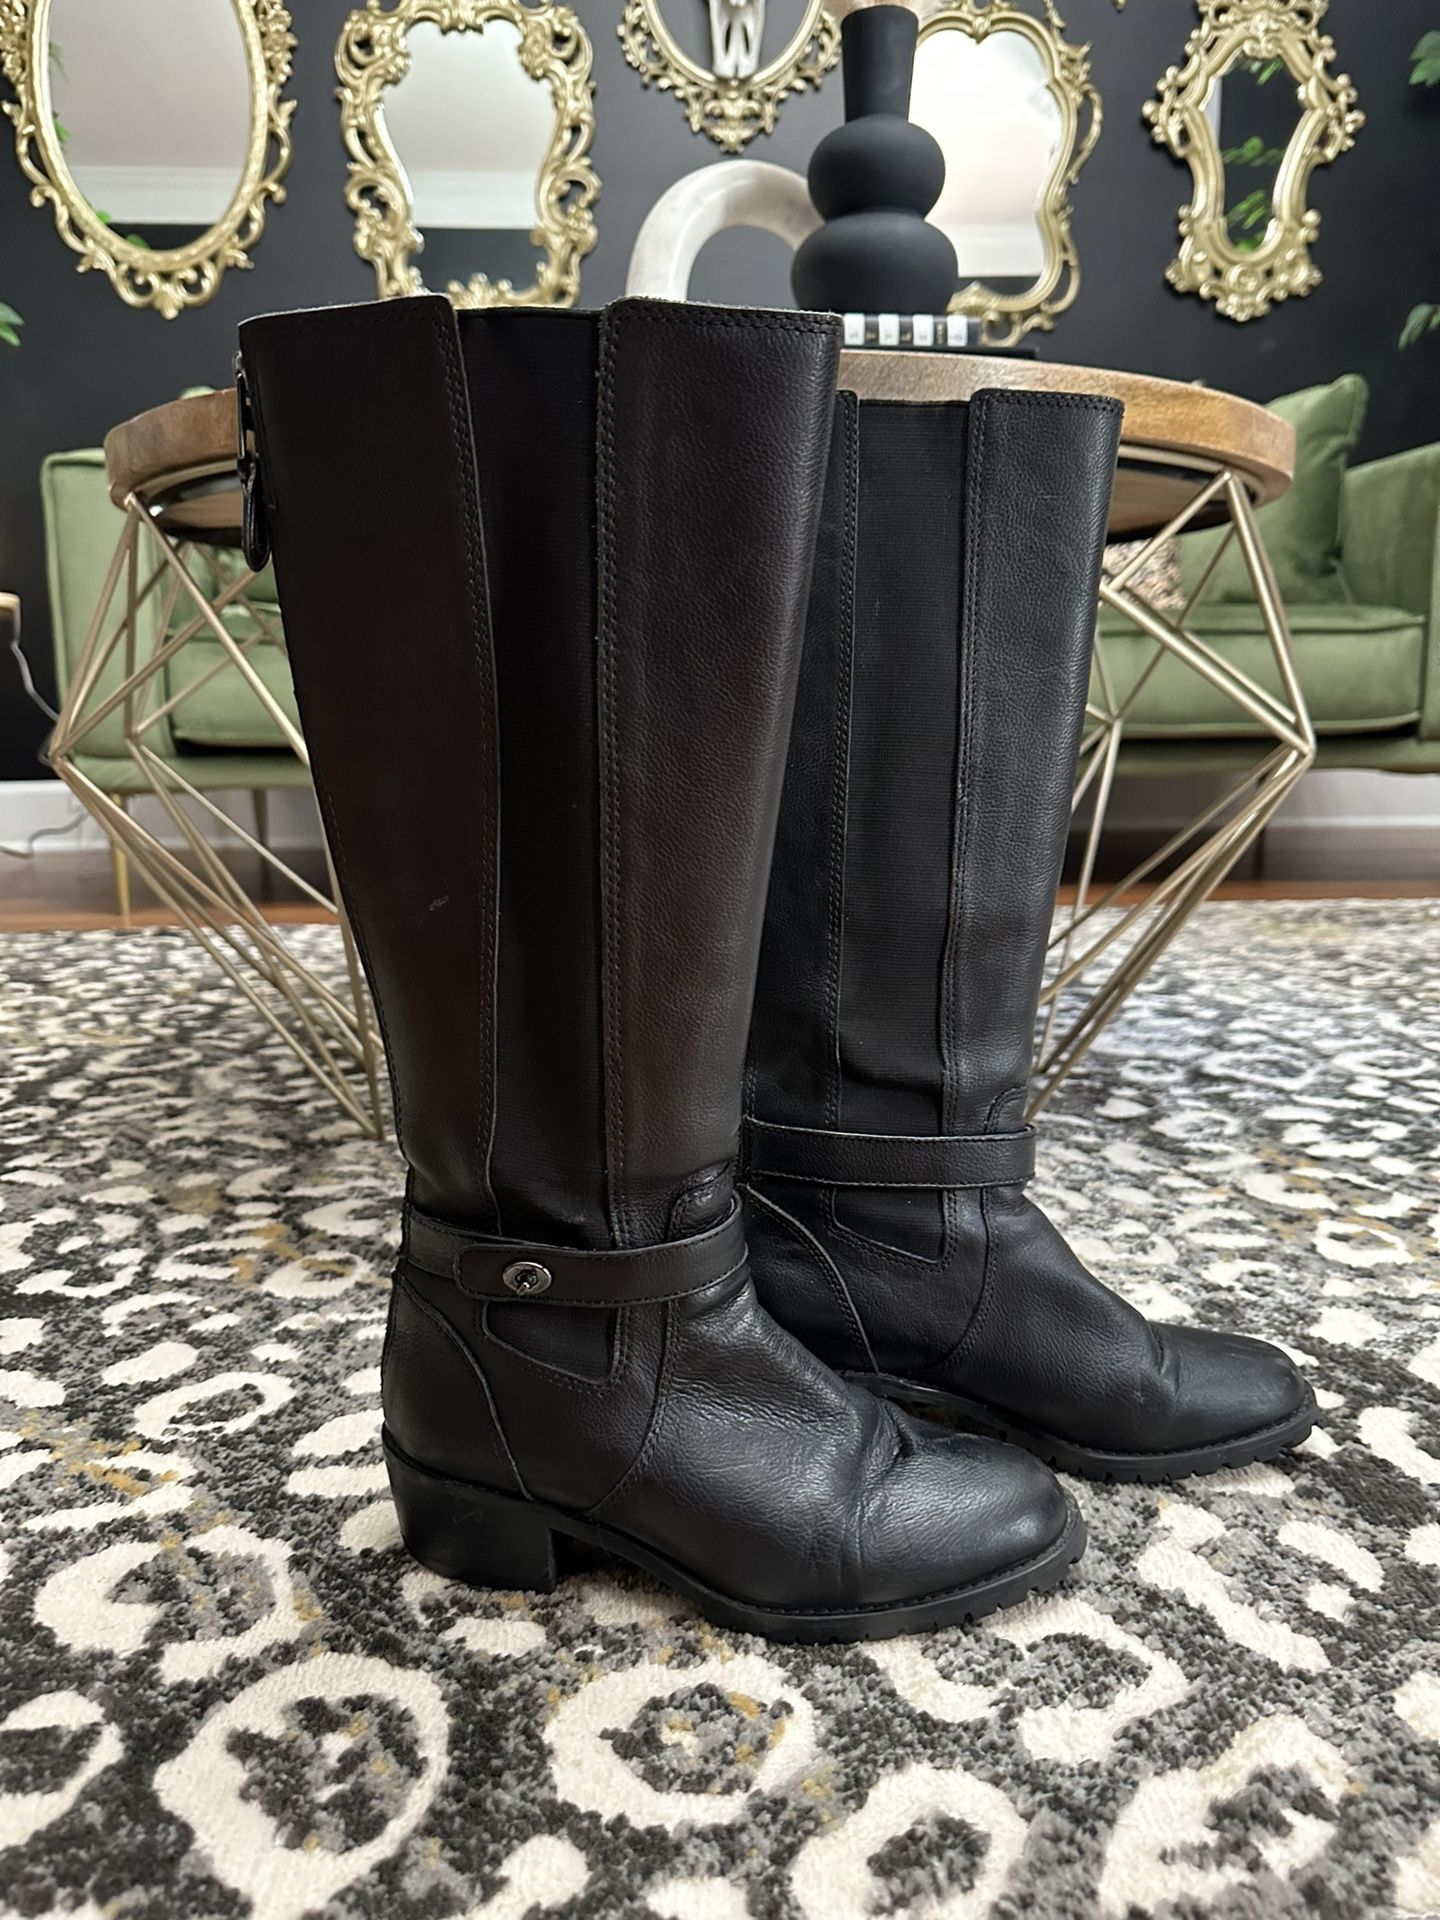 Coach Black “Pencey” Leather Boots❤️ 